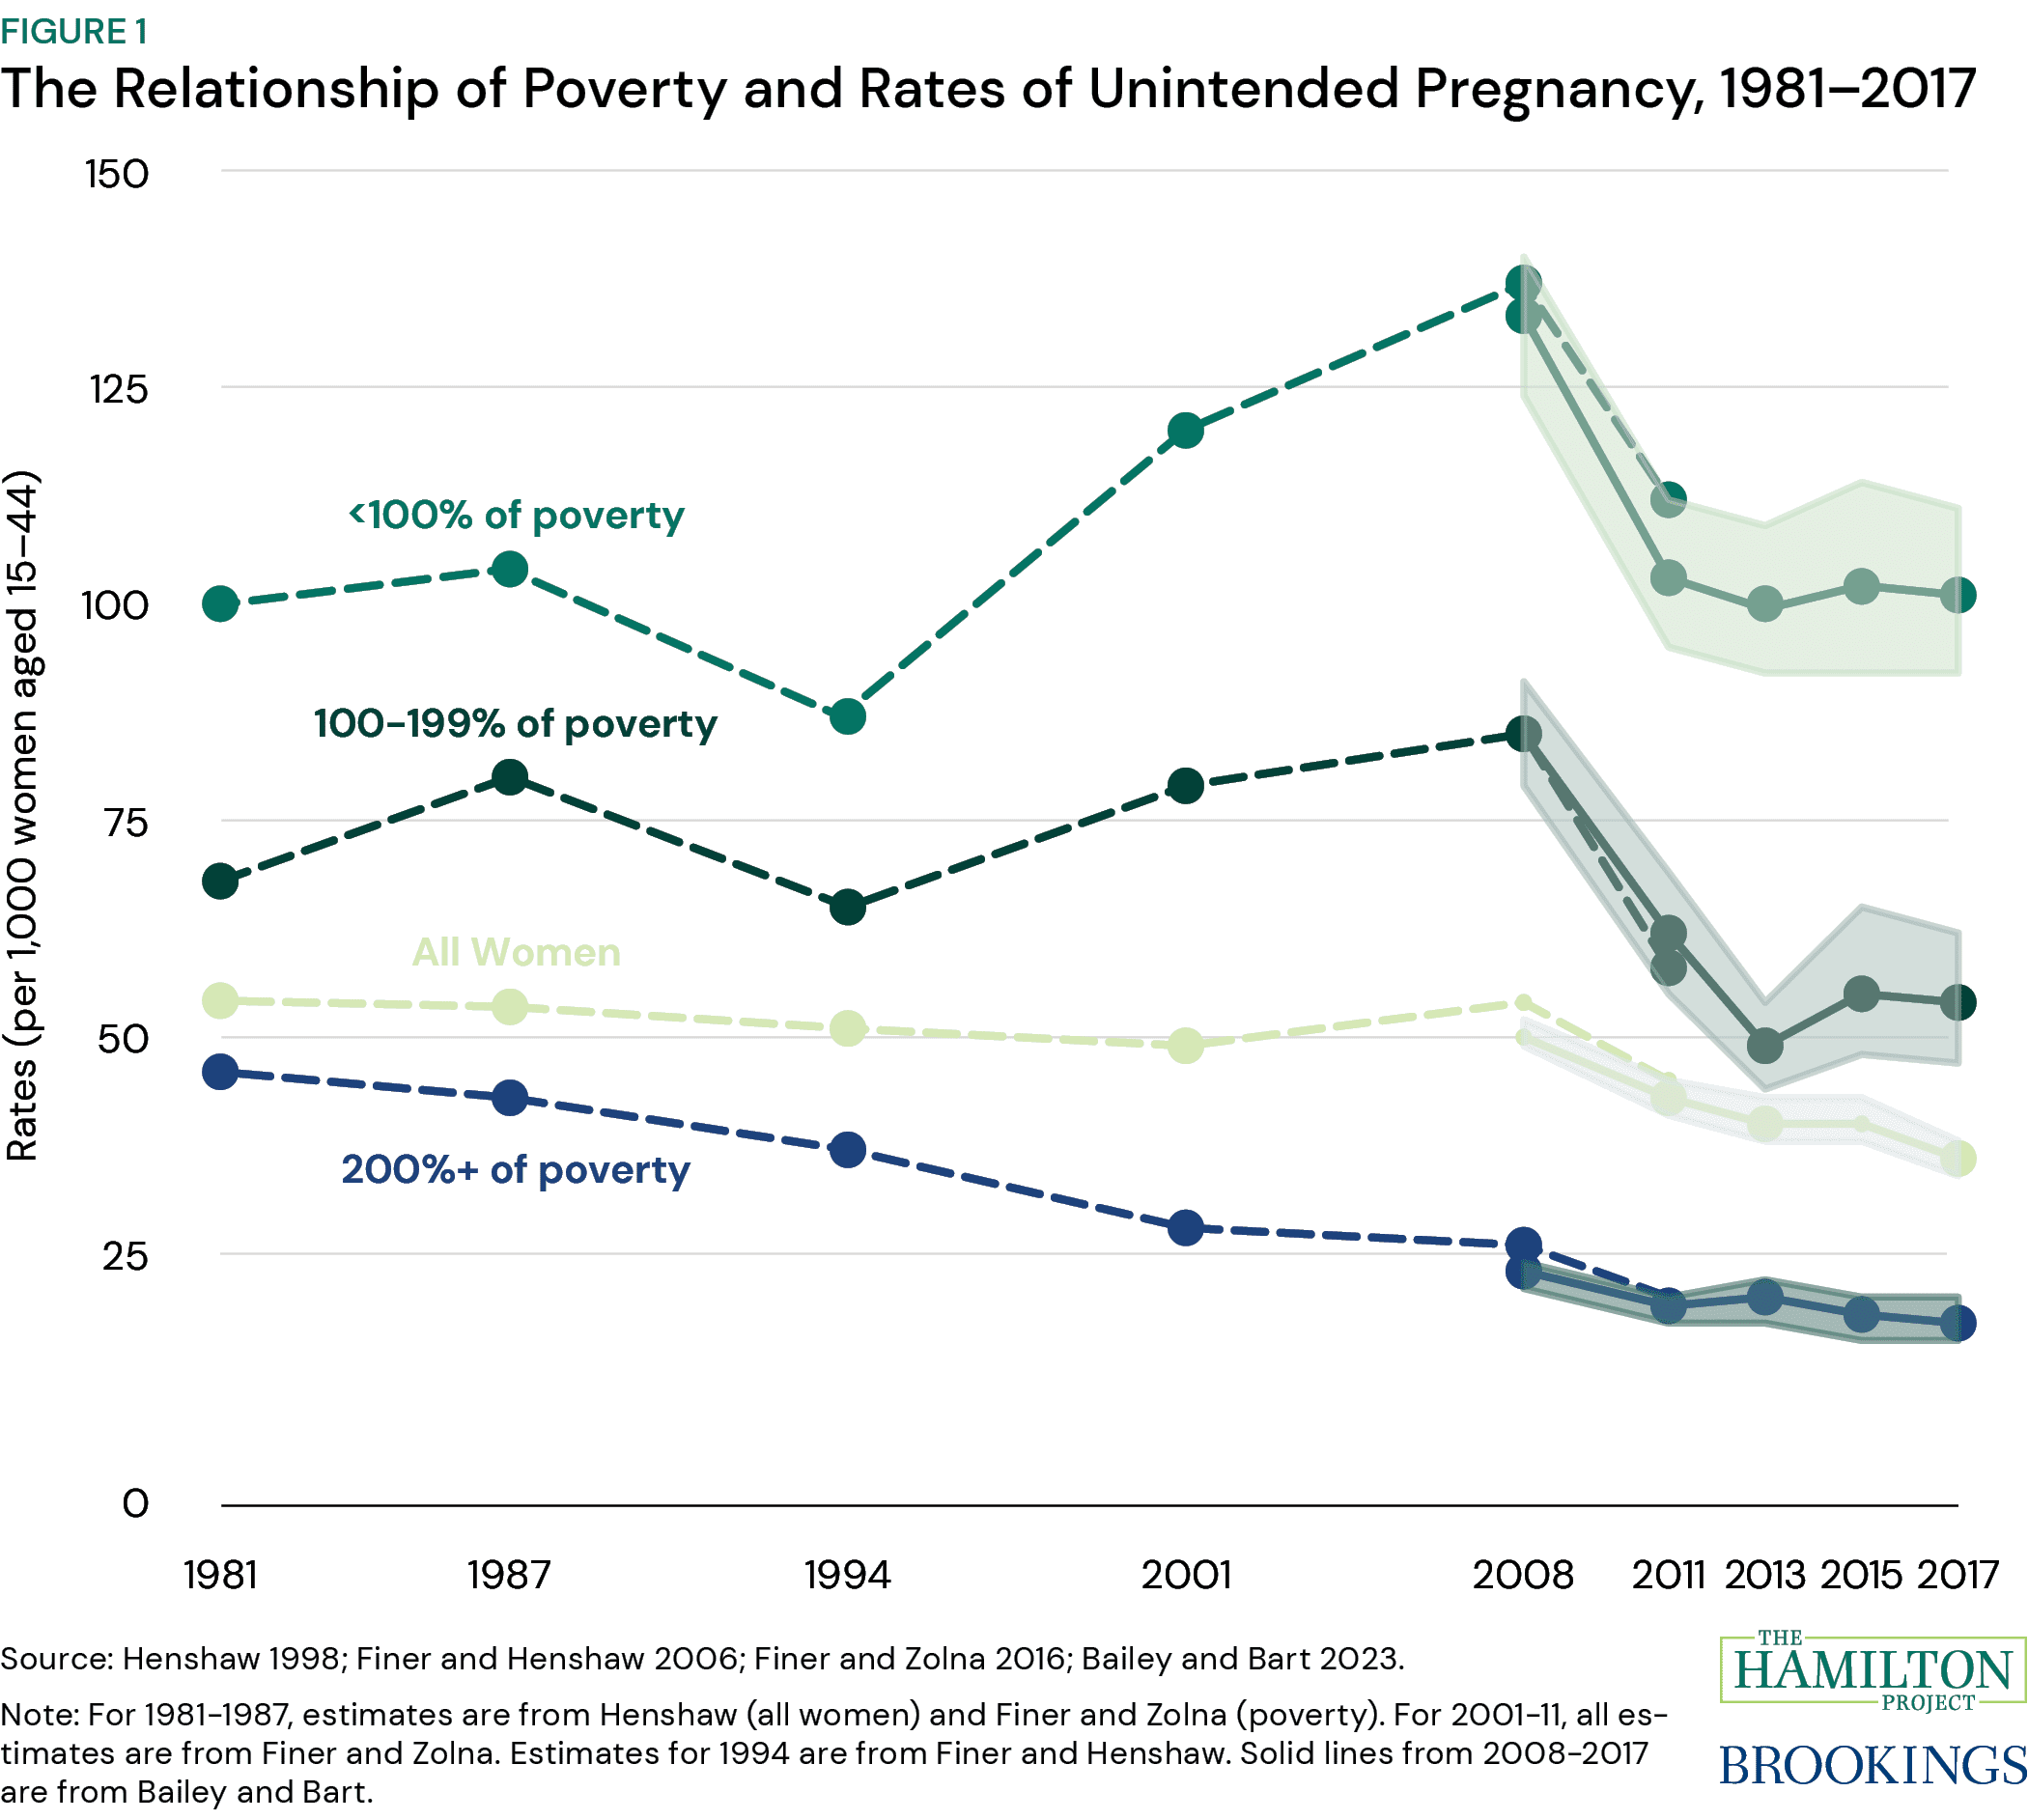 Figure illustrating the relationship of poverty and rates of unintended pregnancy